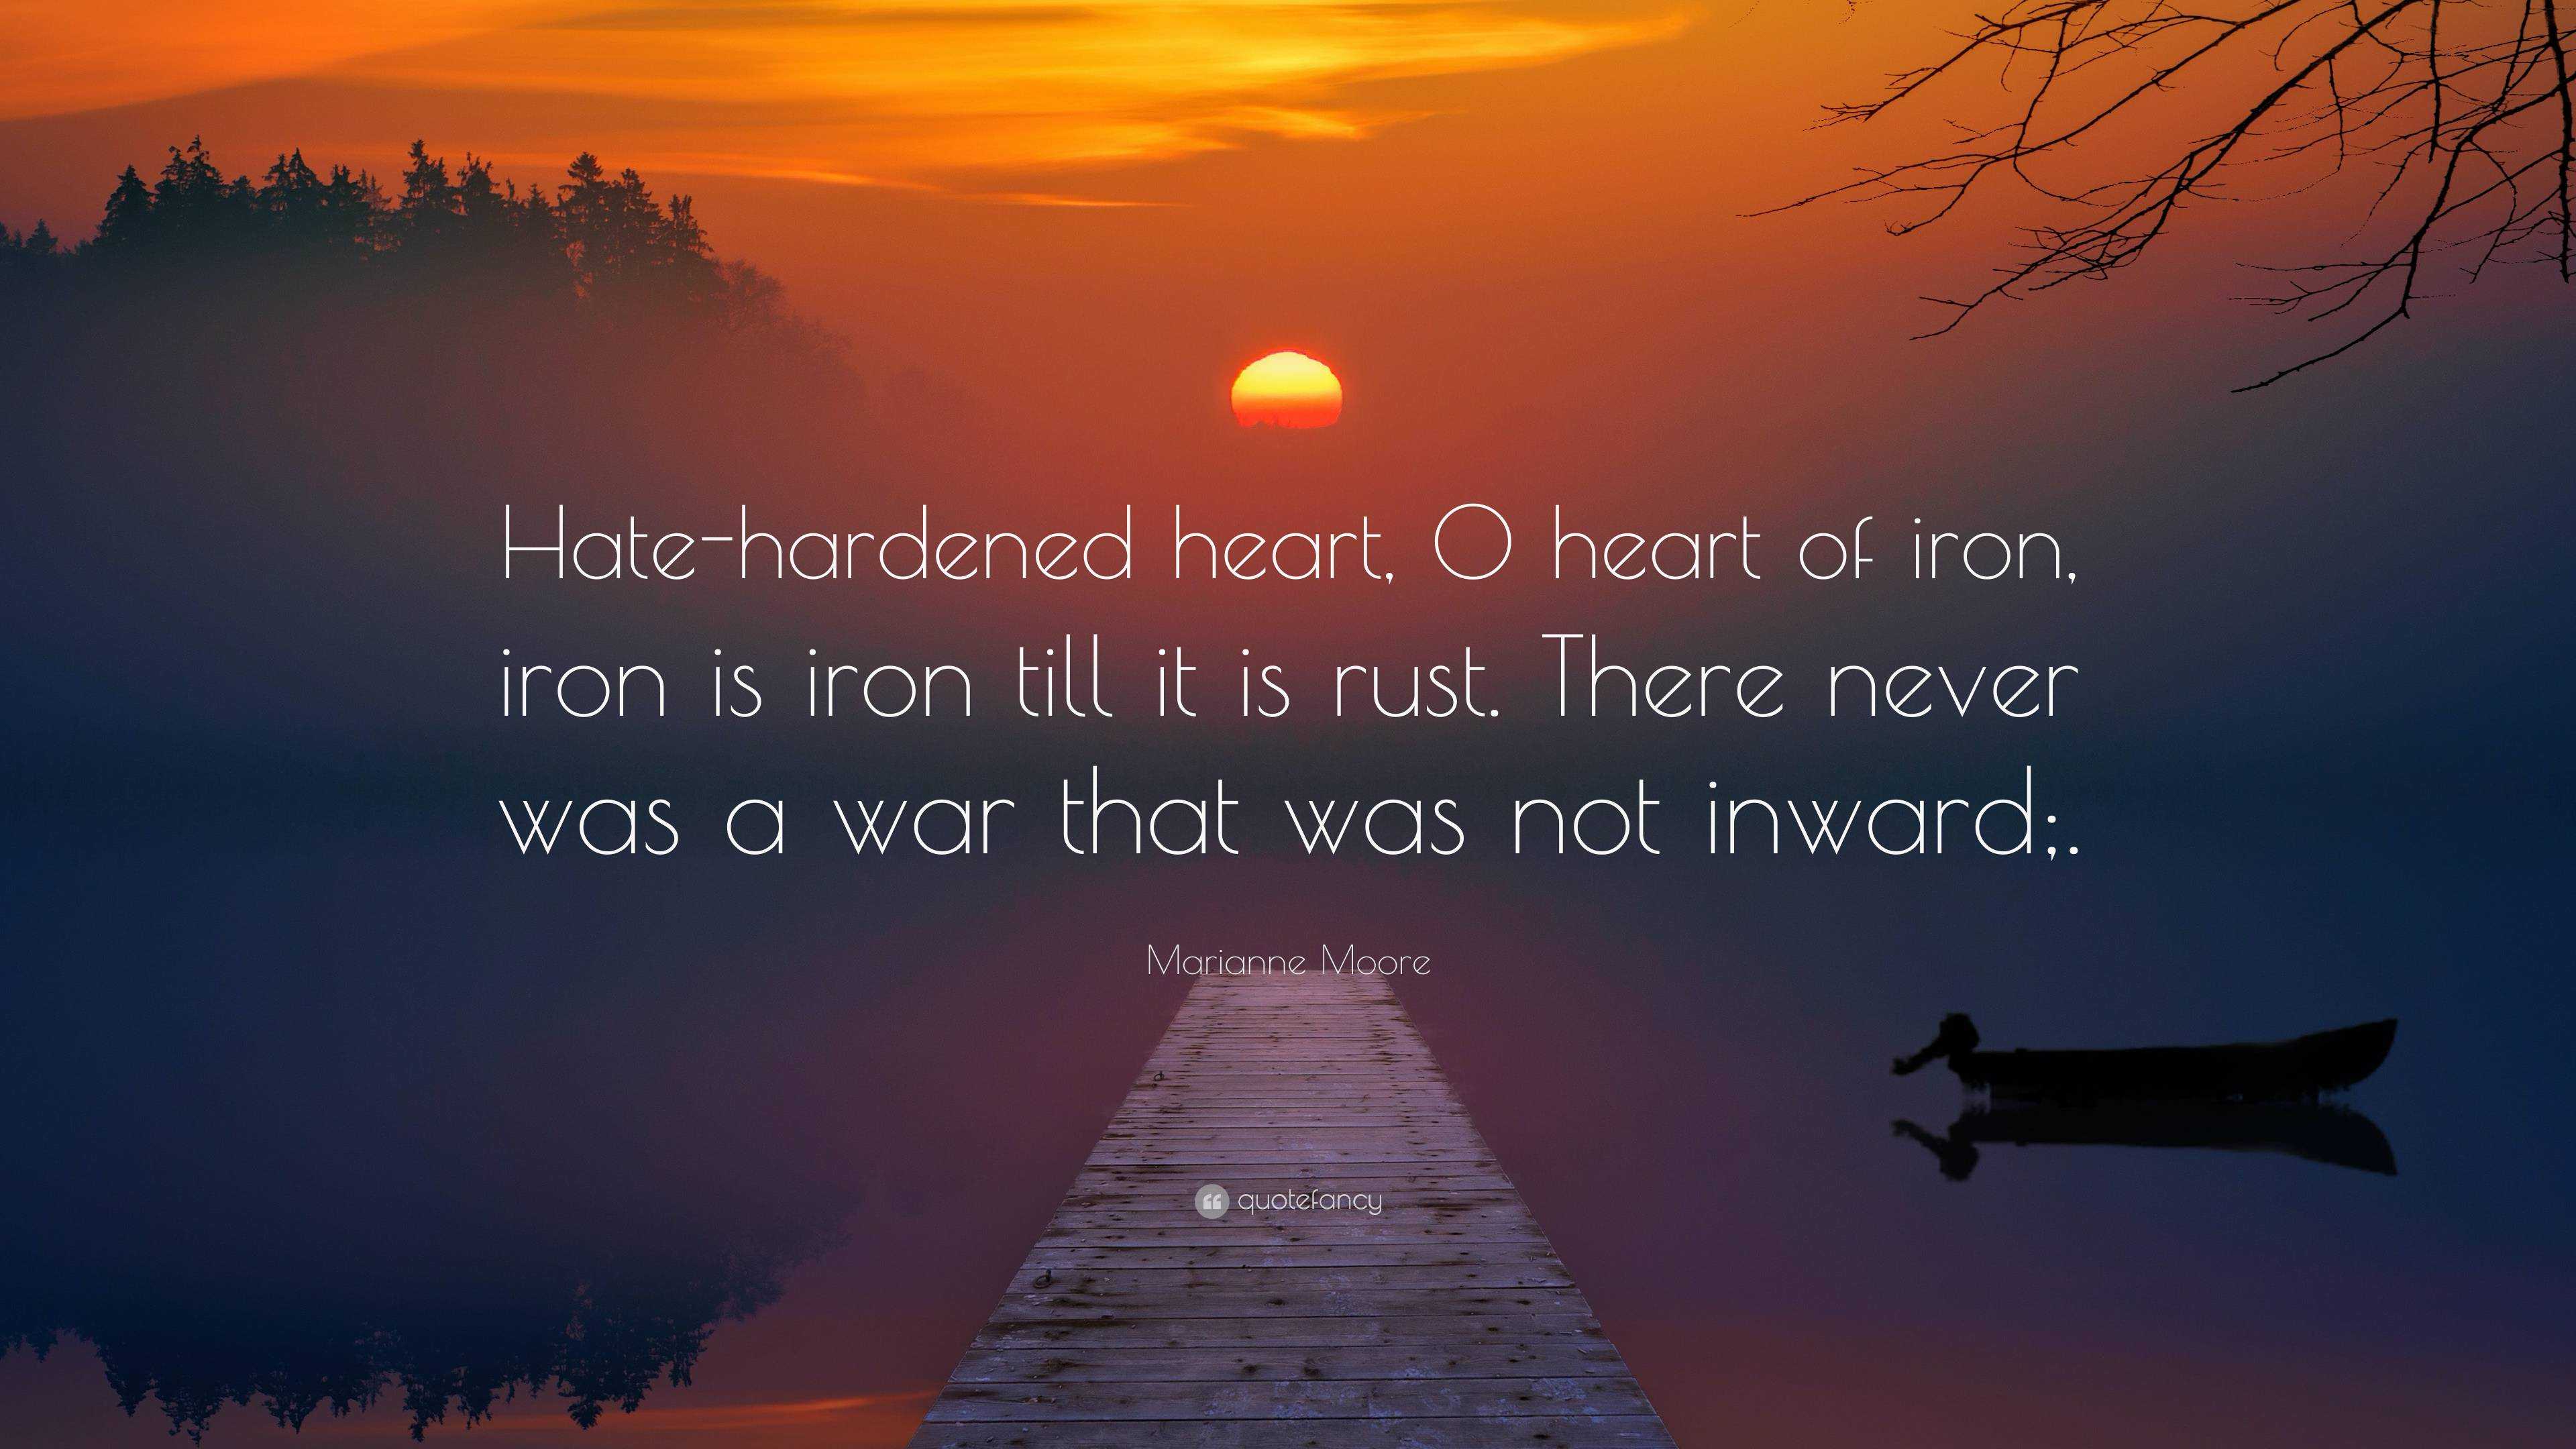 Marianne Moore Quote: “Hate-hardened heart, O heart of iron, iron is ...